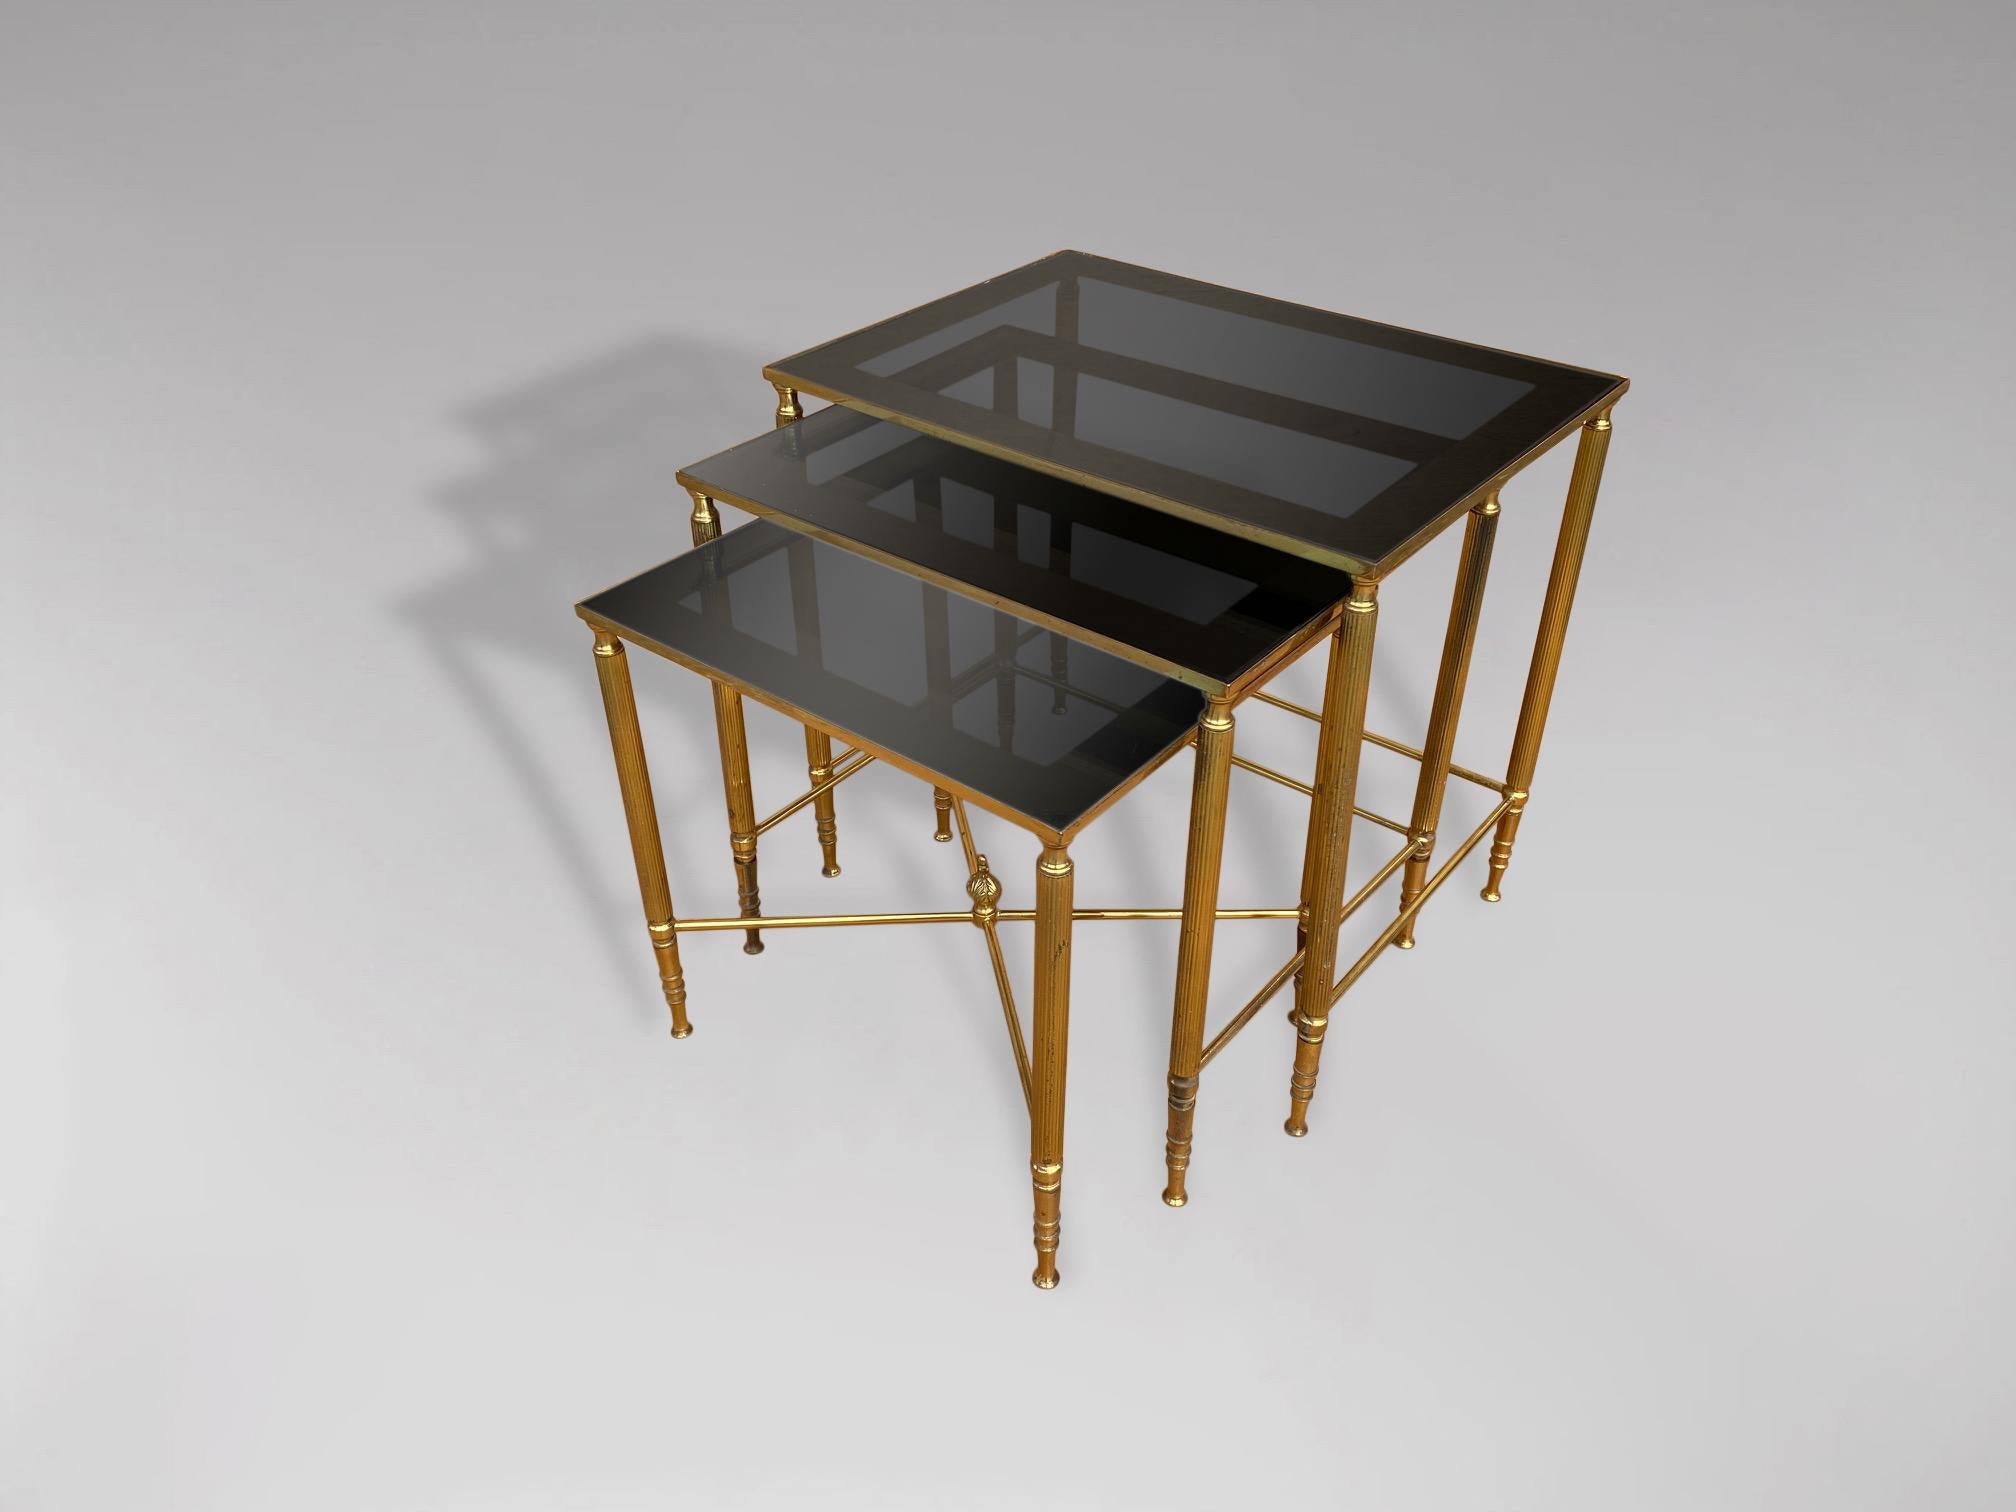 Hollywood Regency 20th Century Nest of 3 Brass Tables with Smoked Glass and Mirror Frame Tops